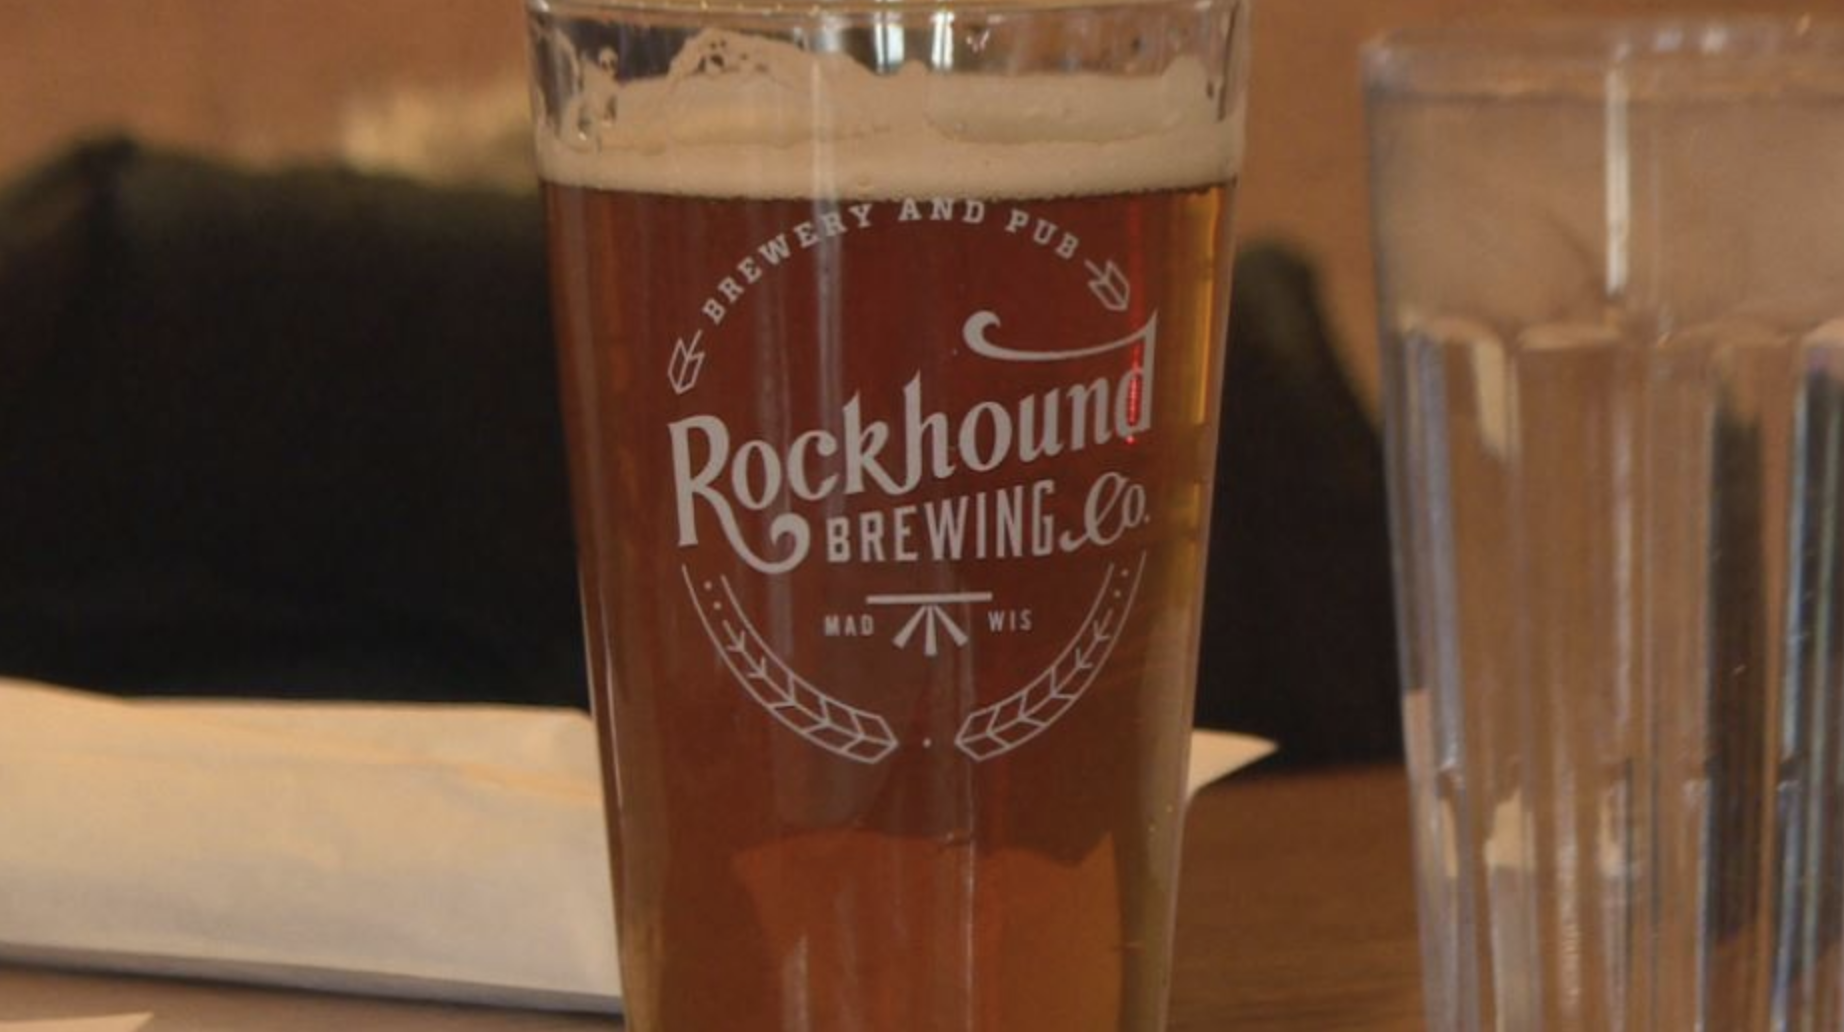 The Rockhound Brewing Company of Madison is closed forever